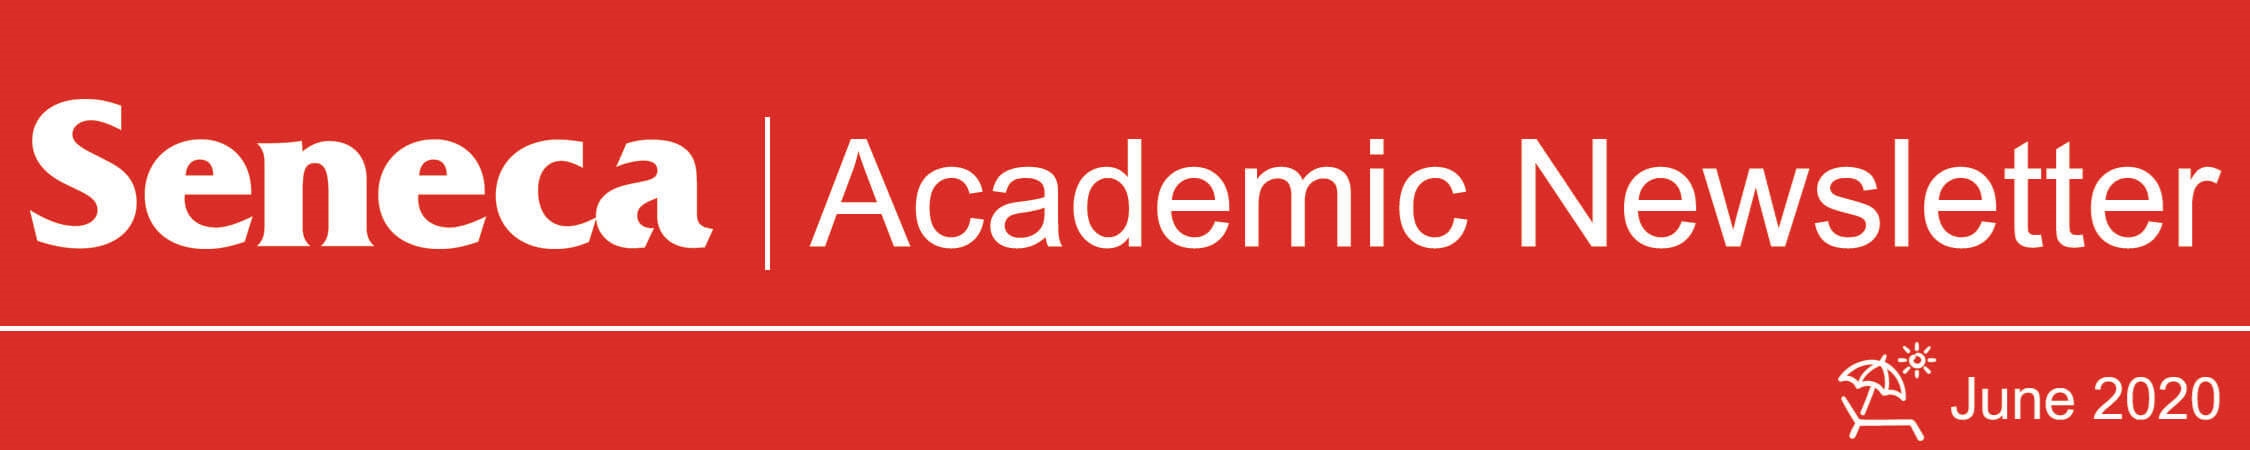 The header logo for the June 2020 issue of the Academic Newsletter